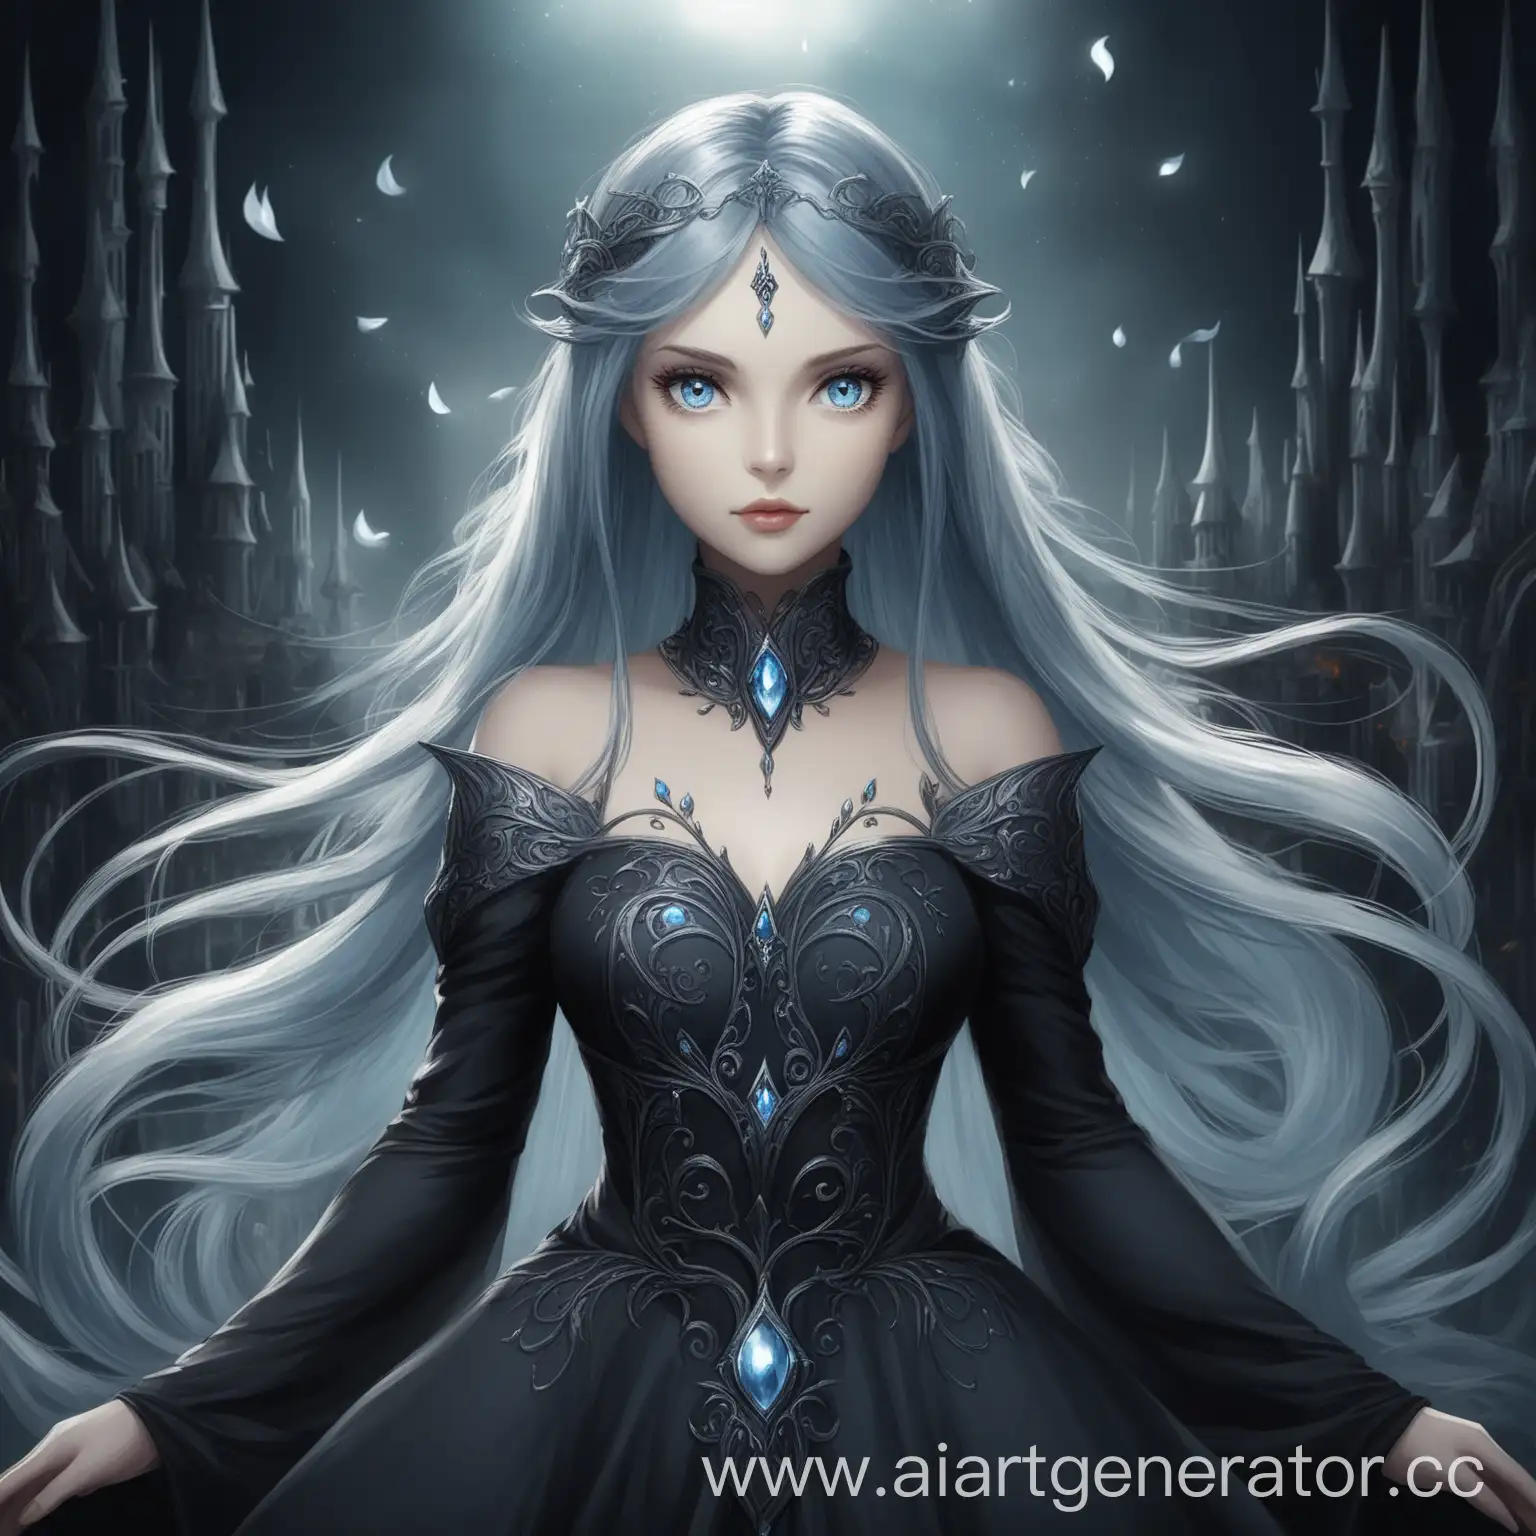 Fantasy-Style-Woman-with-Fair-Hair-and-Greyish-Blue-Eyes-in-Black-Dress